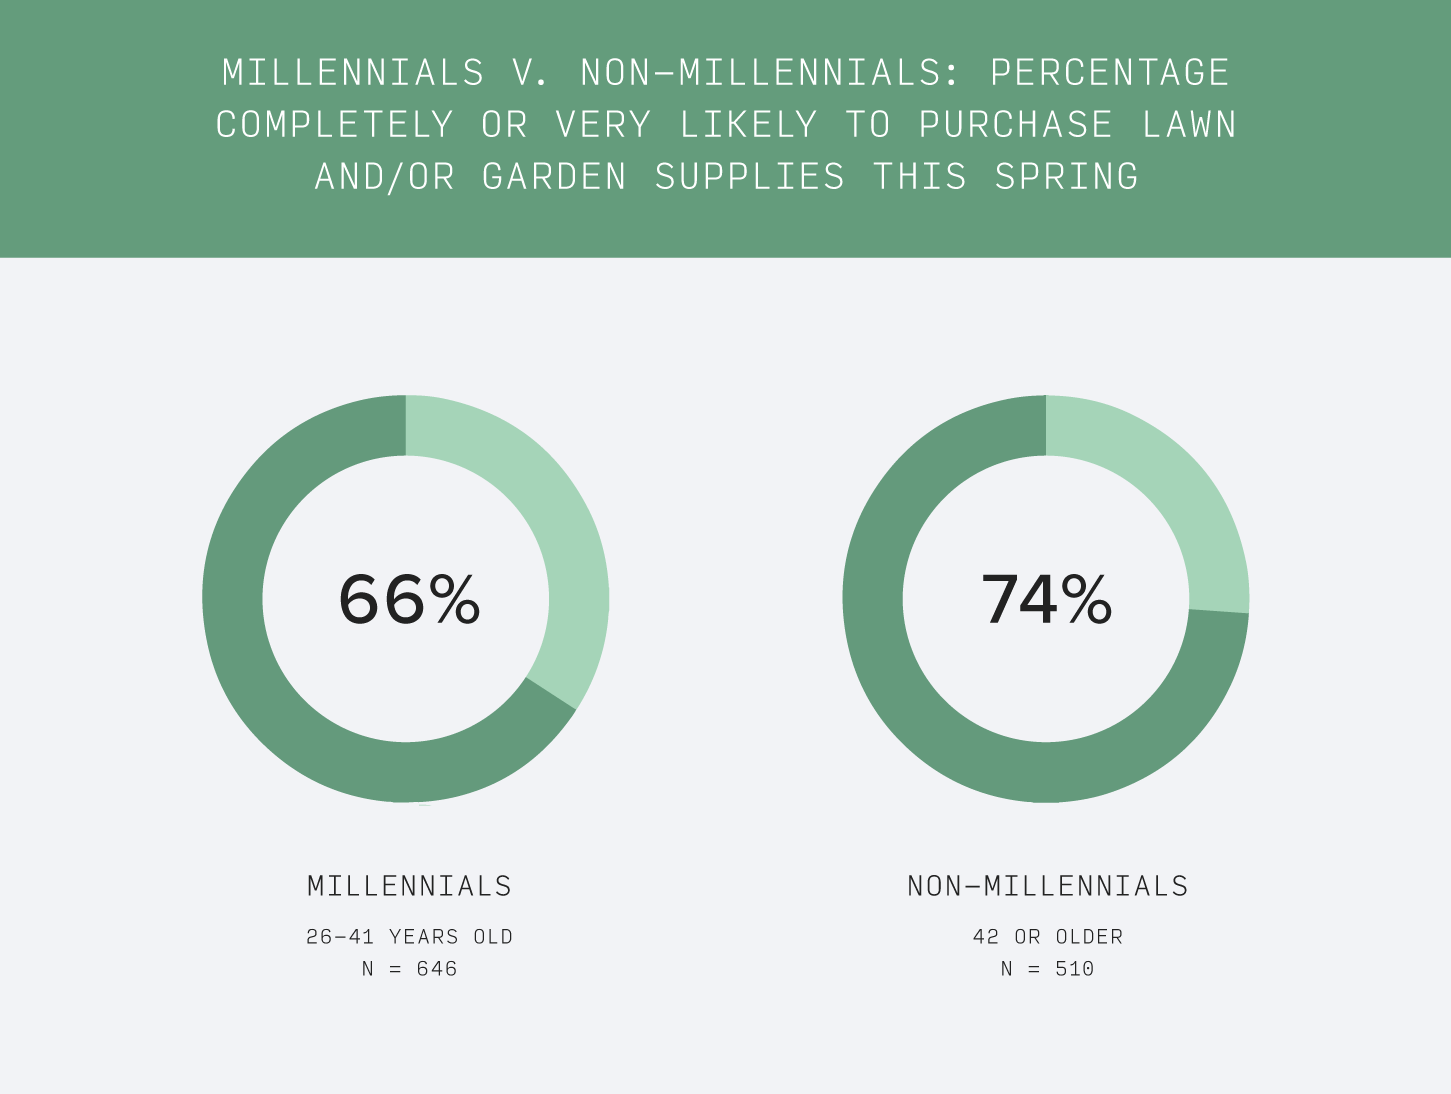 Chart: How millennials are increasingly making lawn and garden purchases